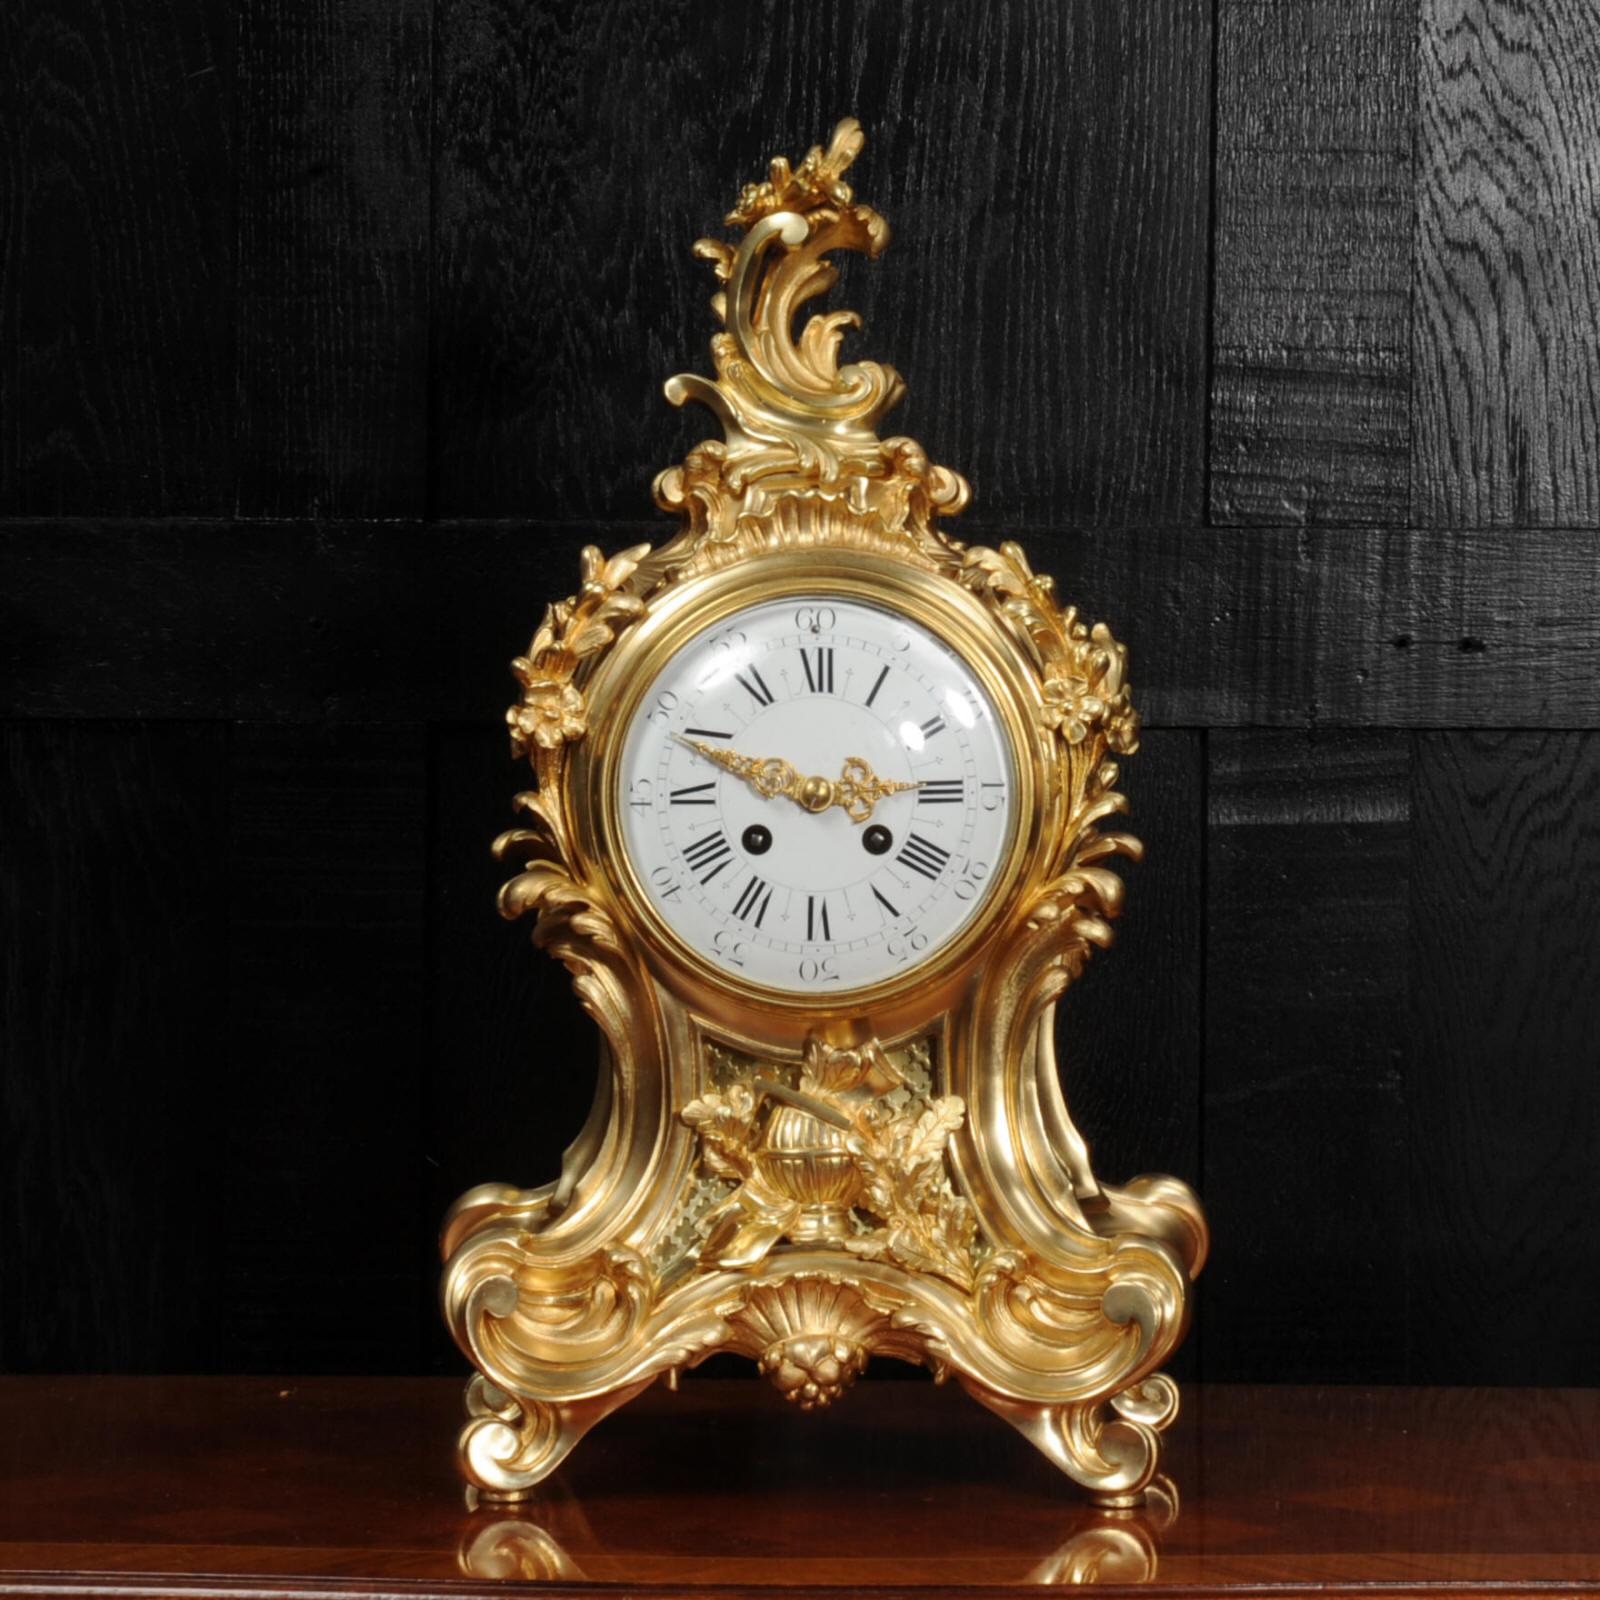 A very fine and substantial gilt bronze table clock, circa 1880, by the esteemed case maker Charles Hour and by clockmaker Louis Japy. It is of the the highest quality, beautifully modelled and finished in glorious ormolu (finely gilded bronze or